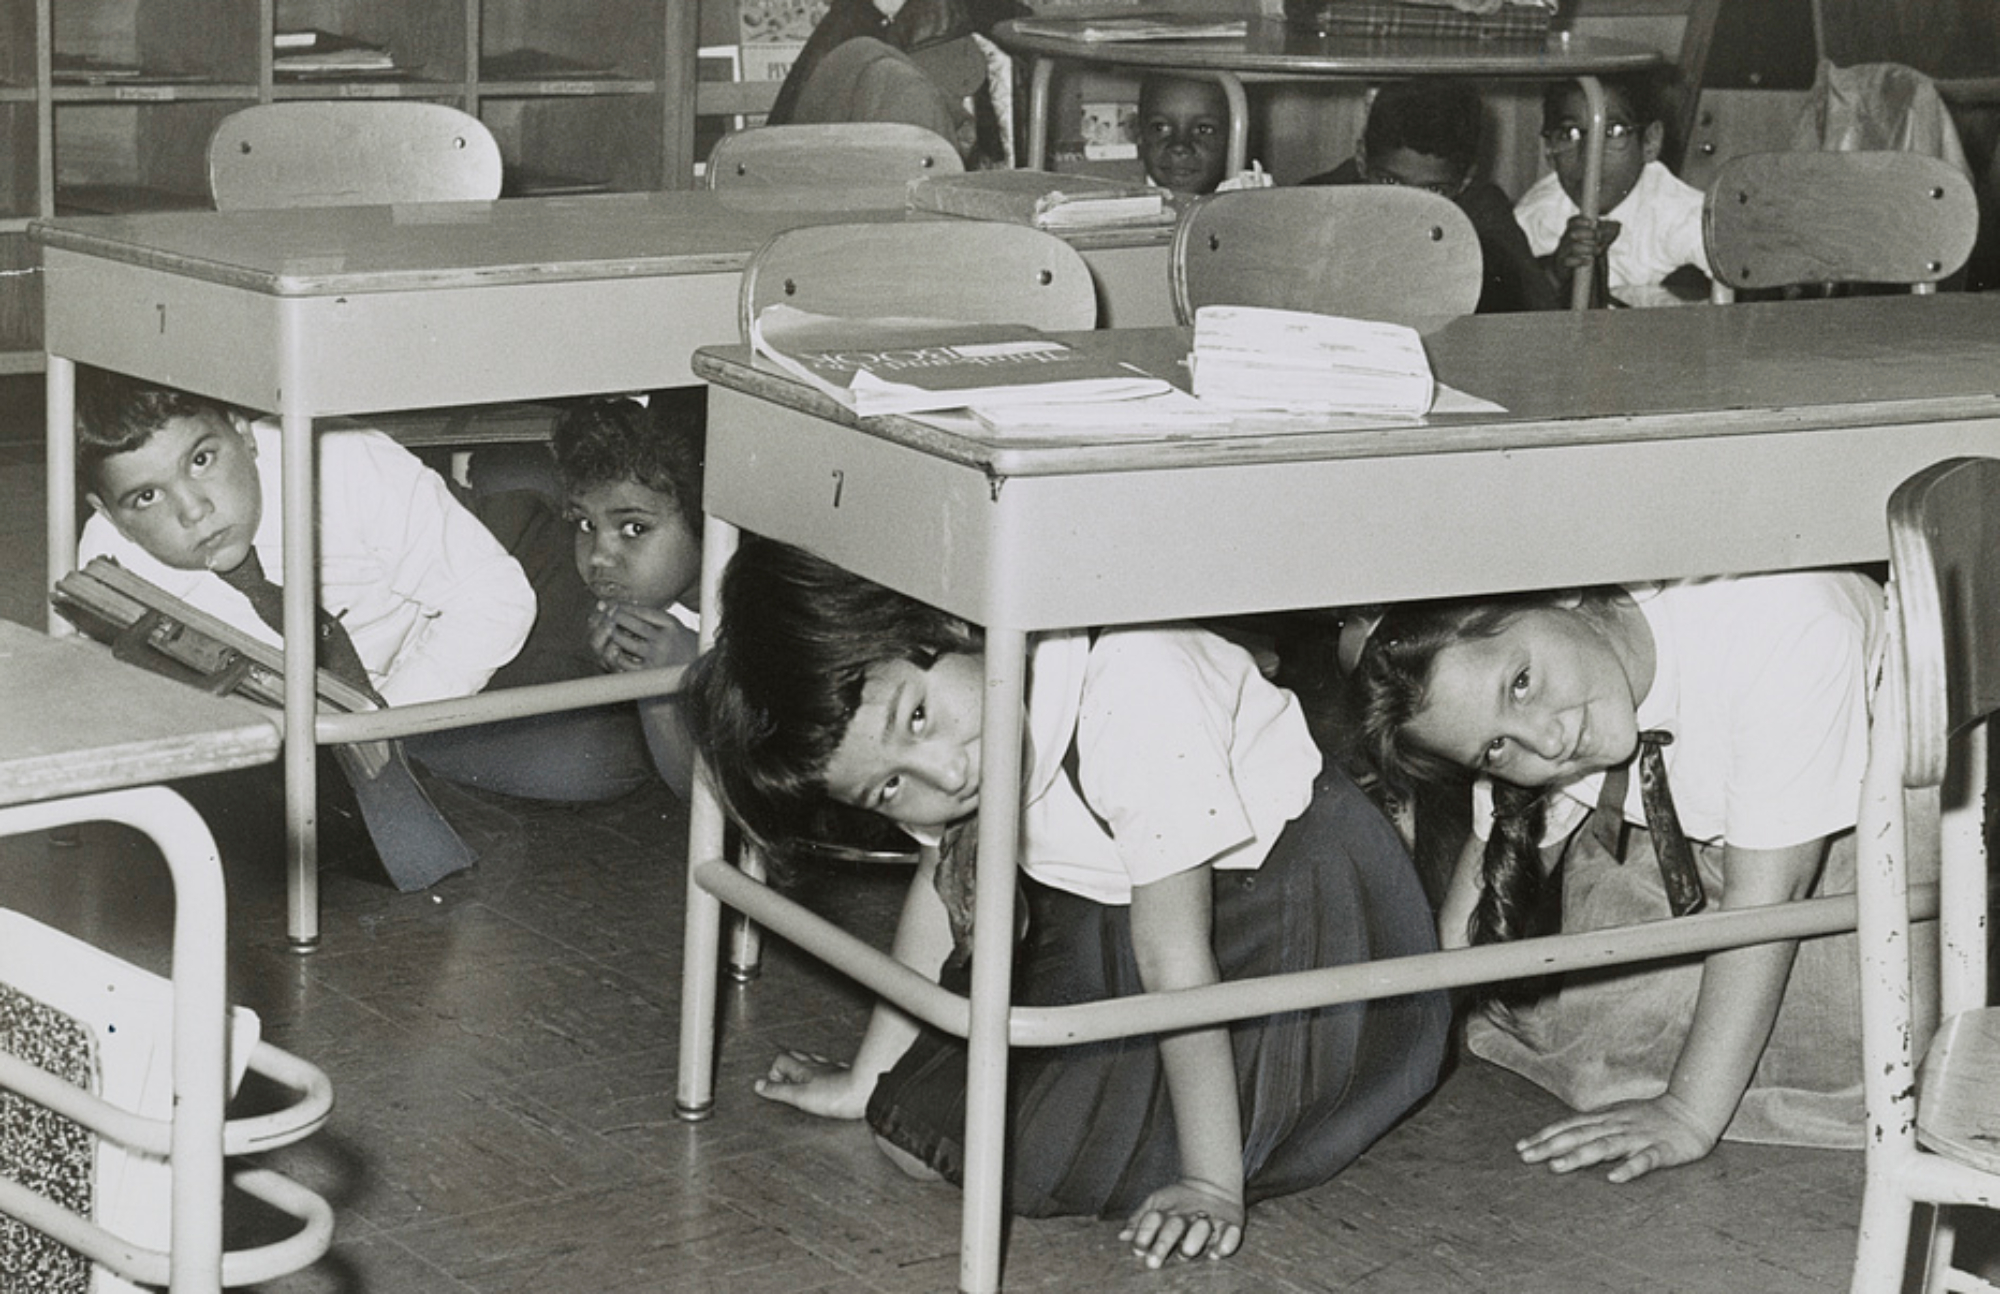 School children in a nuclear attack duck-and-cover drill in a public school in Brooklyn, New York, 1962. Photo by Walter Albertin, Library of Congress via wikimedia.